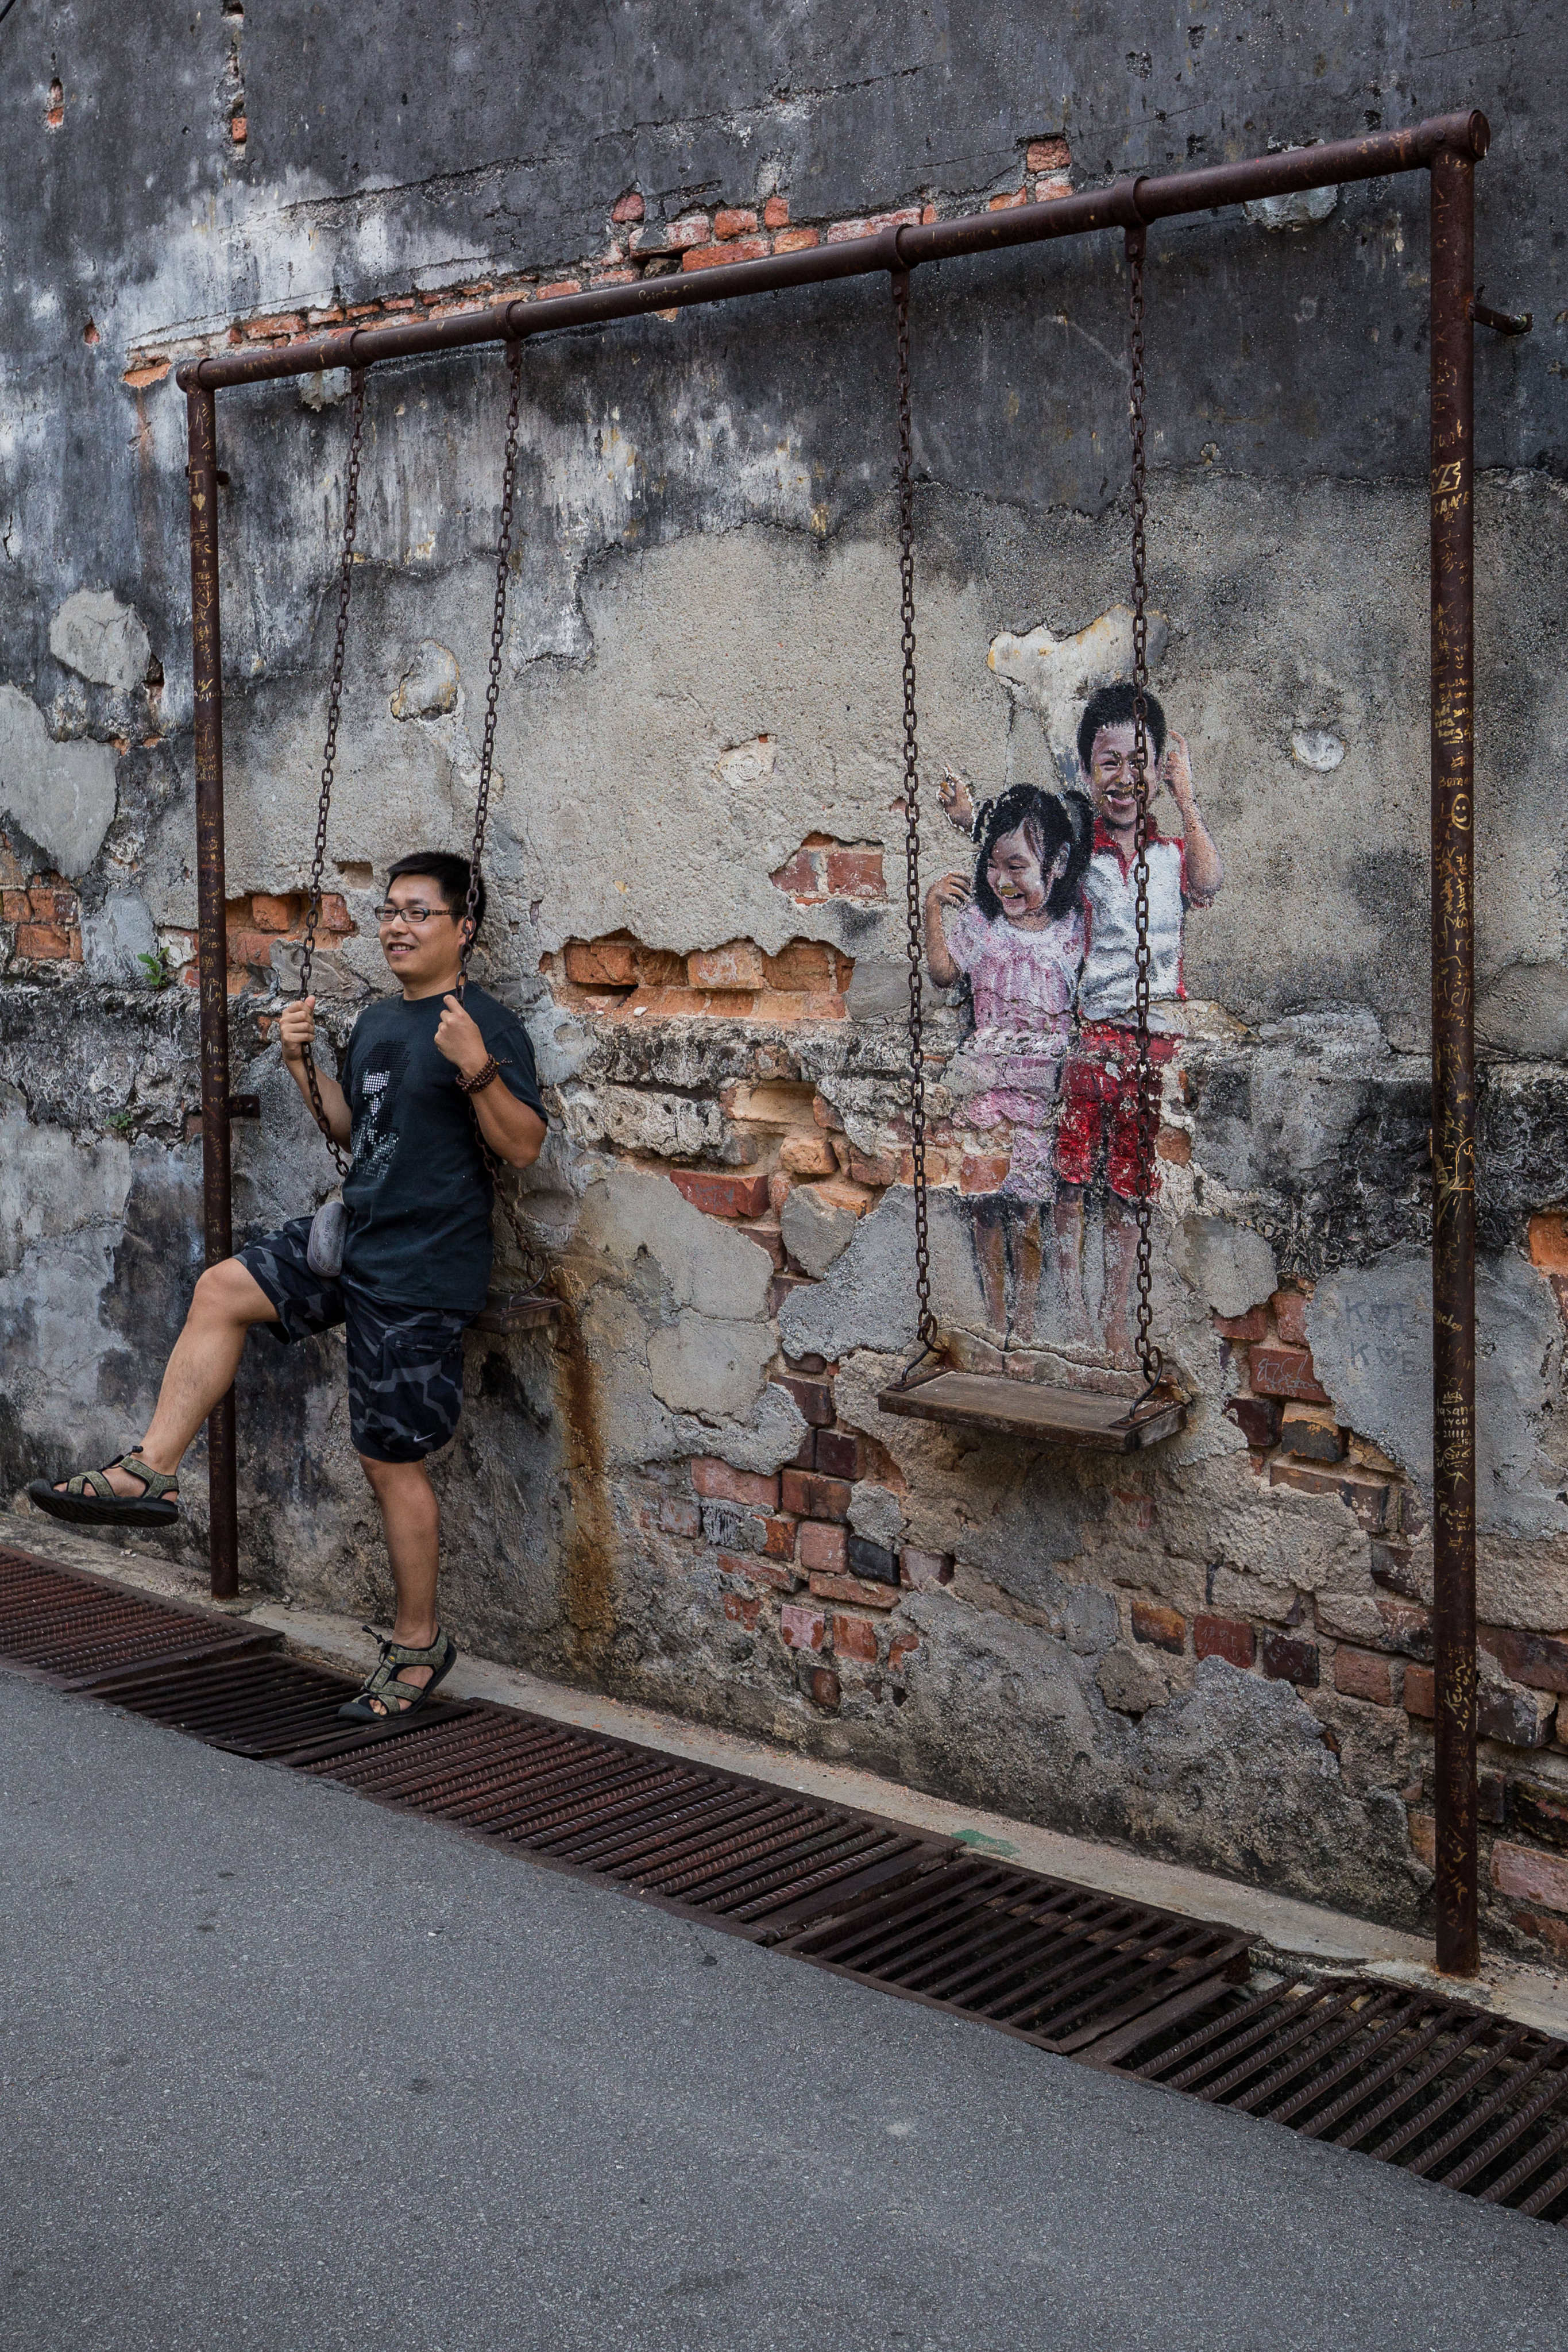 A tourist has his photo taken next to “Brother and Sister on a Swing”, a work of street art in George Town, Penang, Malaysia, by local artist Louis Gan. Photo: Getty Images